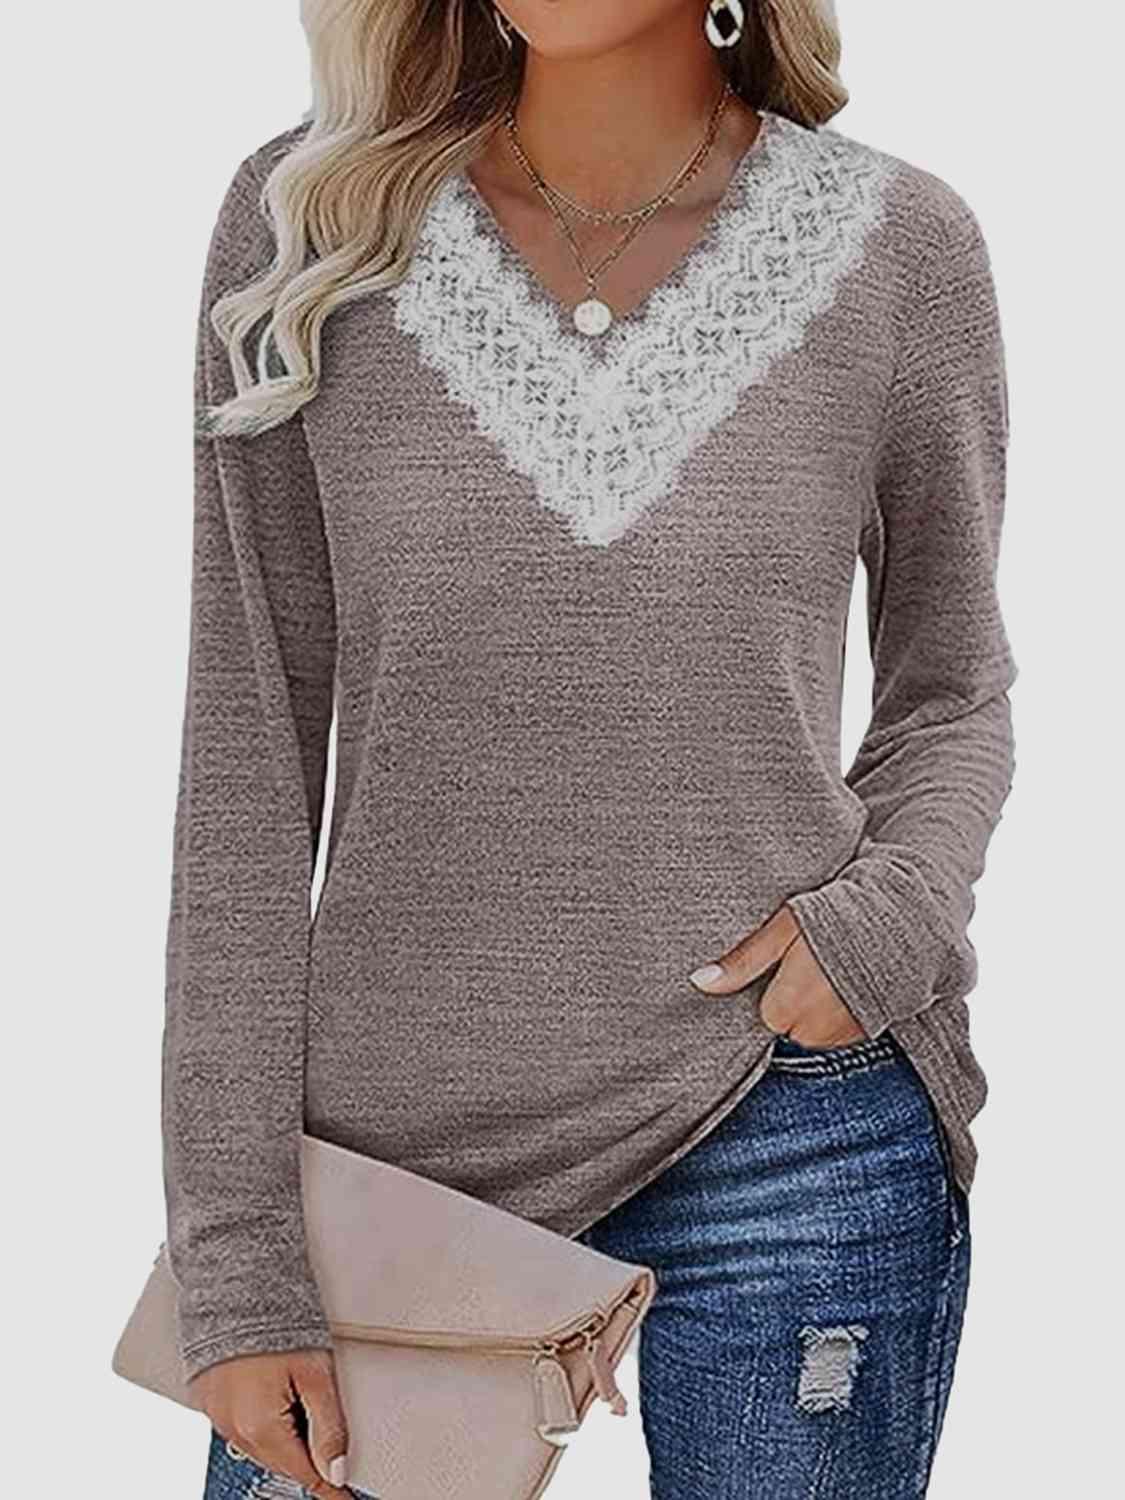 a woman wearing a grey sweater with a white lace trim